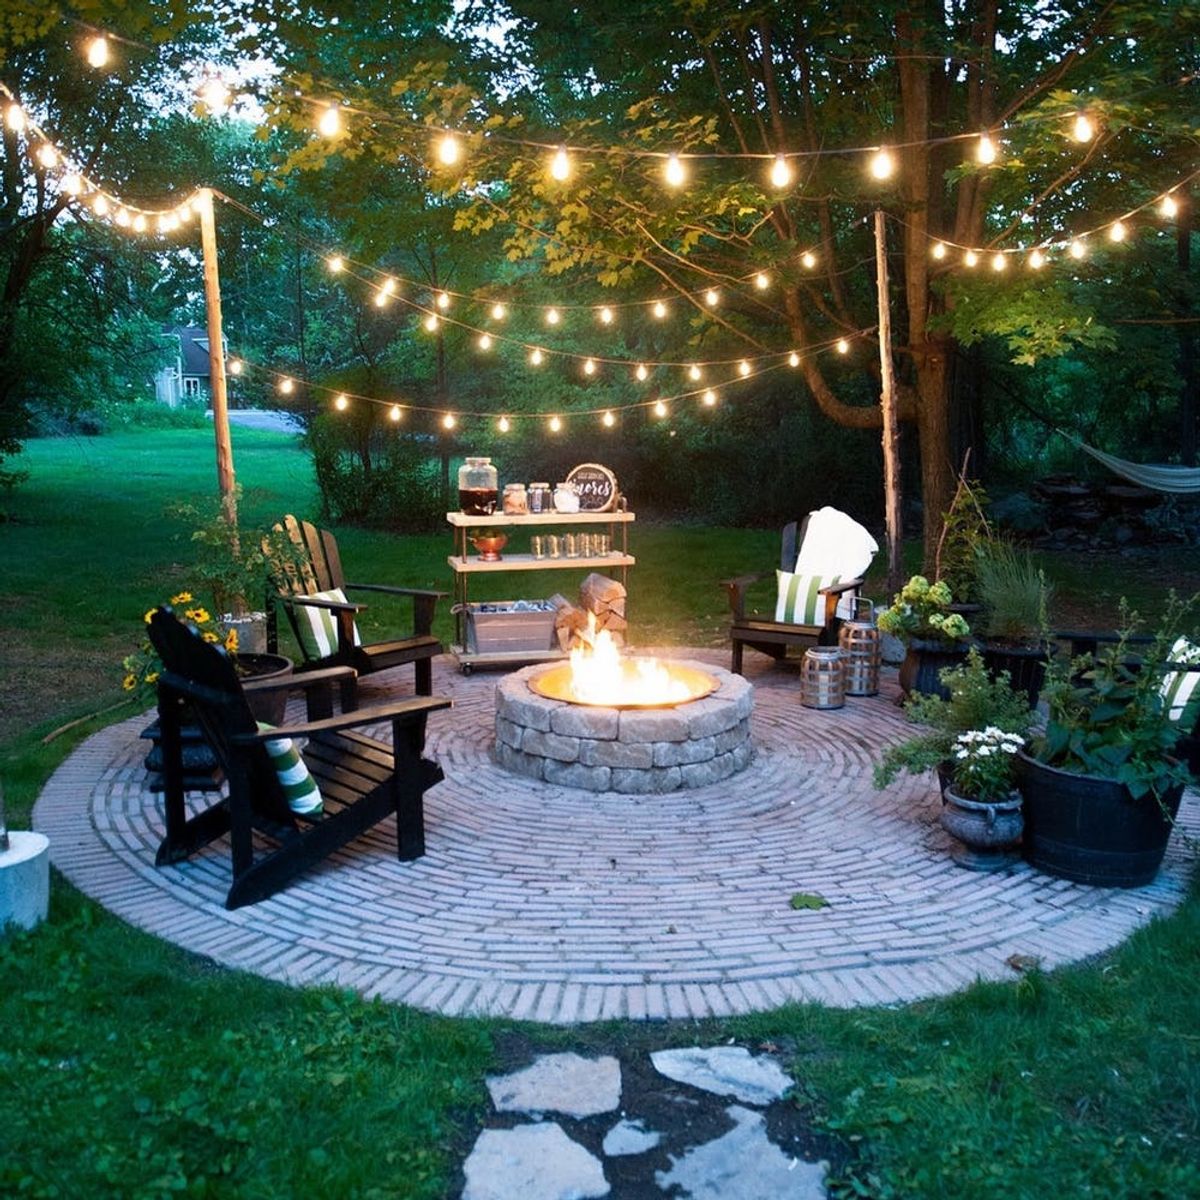 6 Outdoor Home Decor Trends We Can’t Stop Pinning